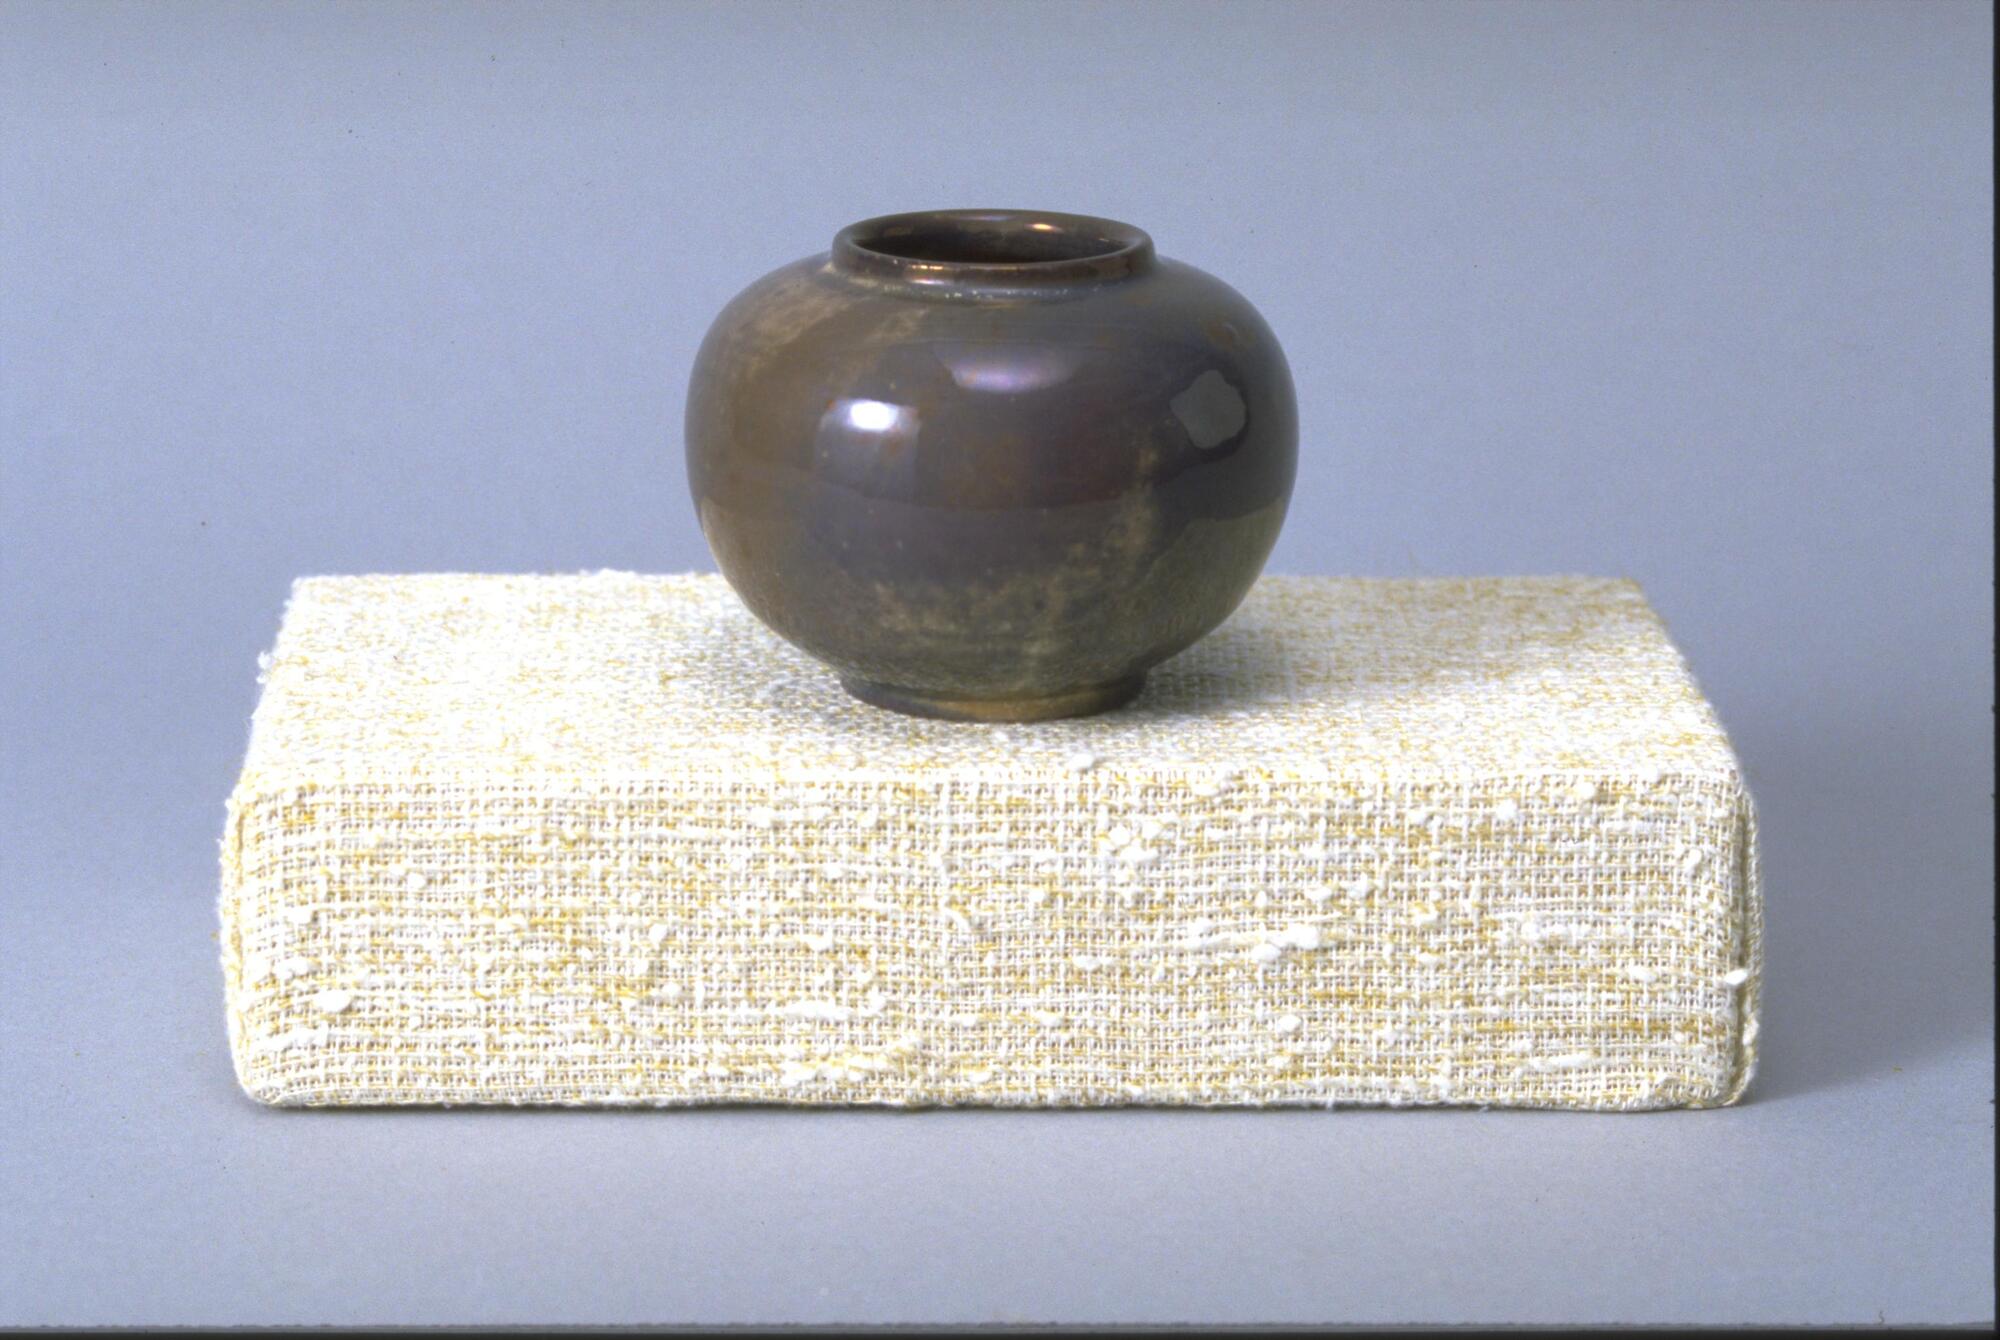 Footed vessel with round body and covered in iridescent muddy gray-ish glaze